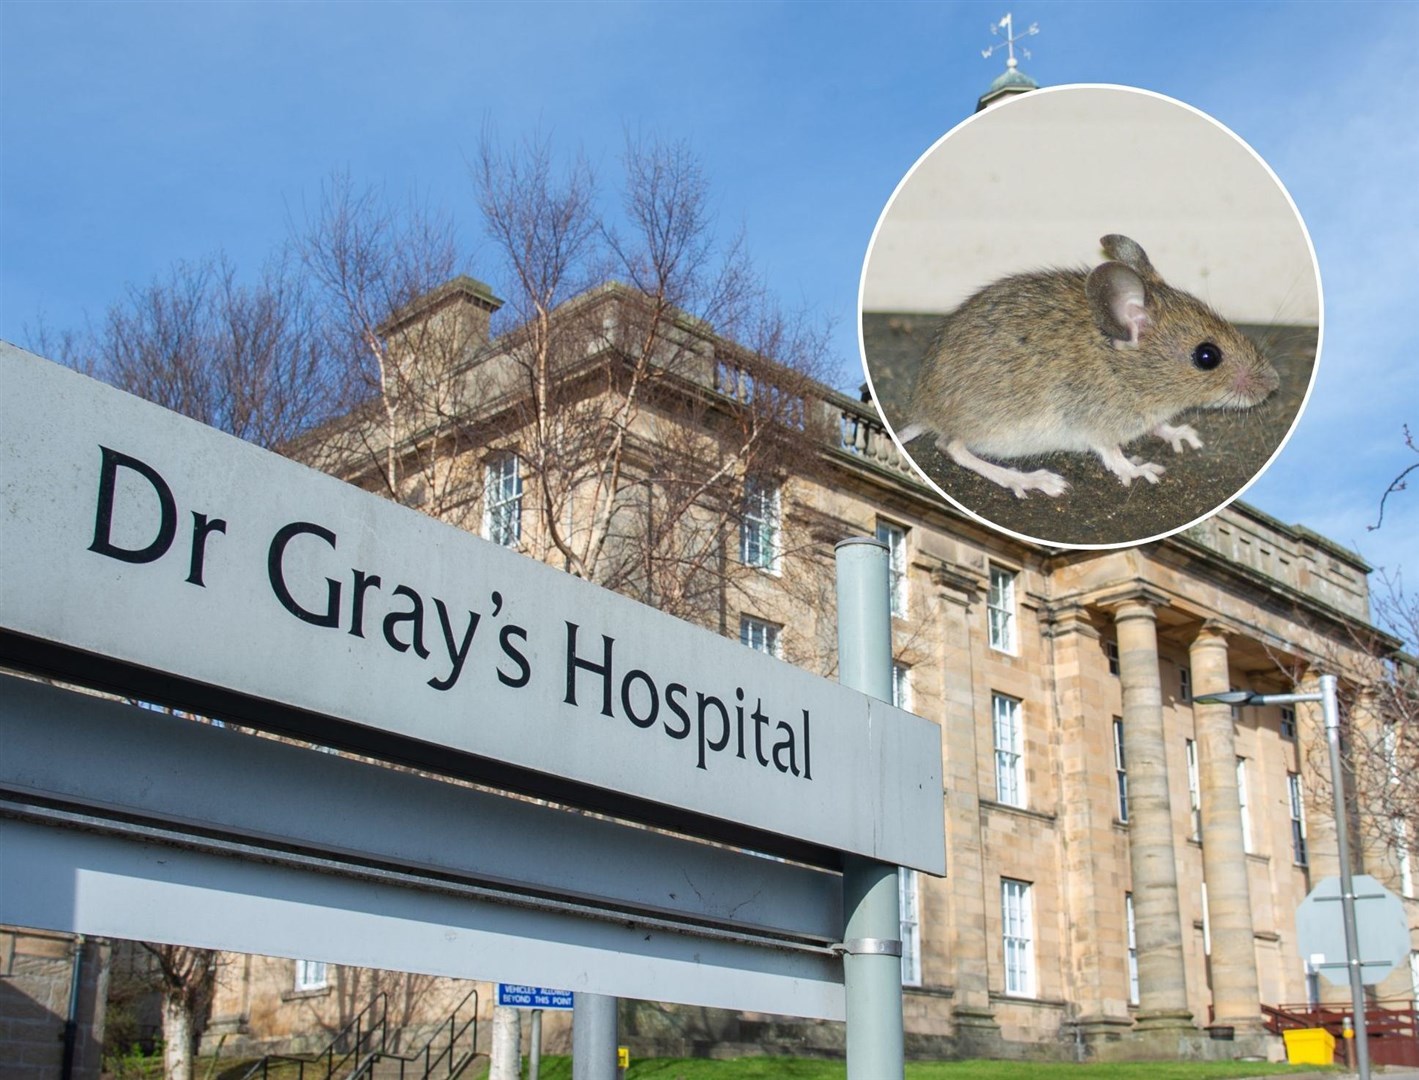 NHS Grampian says that the situation will continue to be monitored by pest control experts.